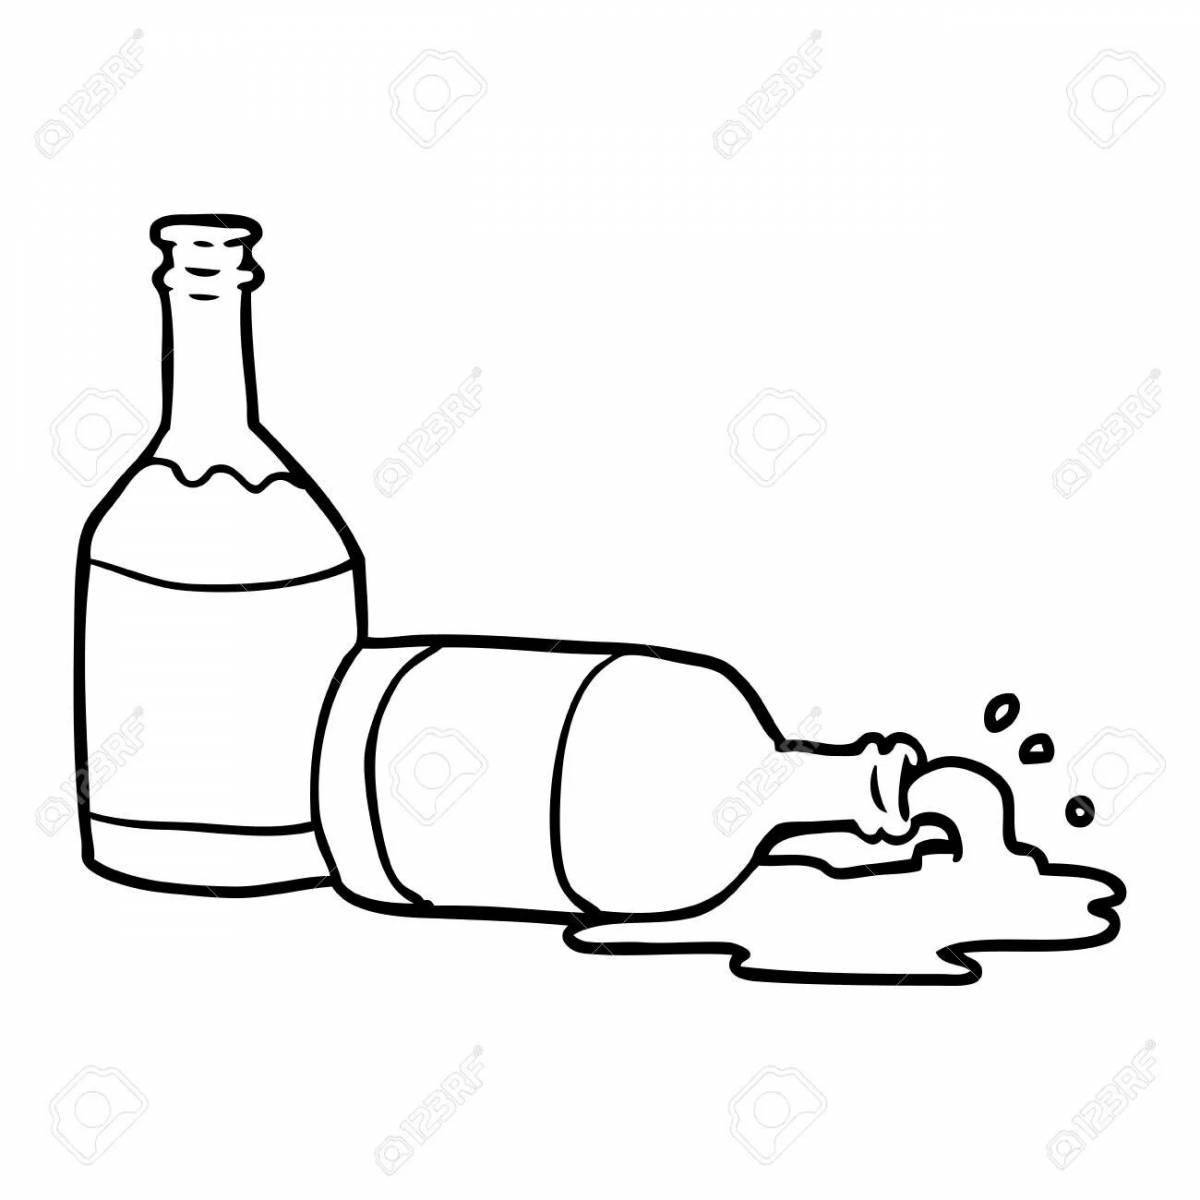 Sparkling alcohol bottle coloring page